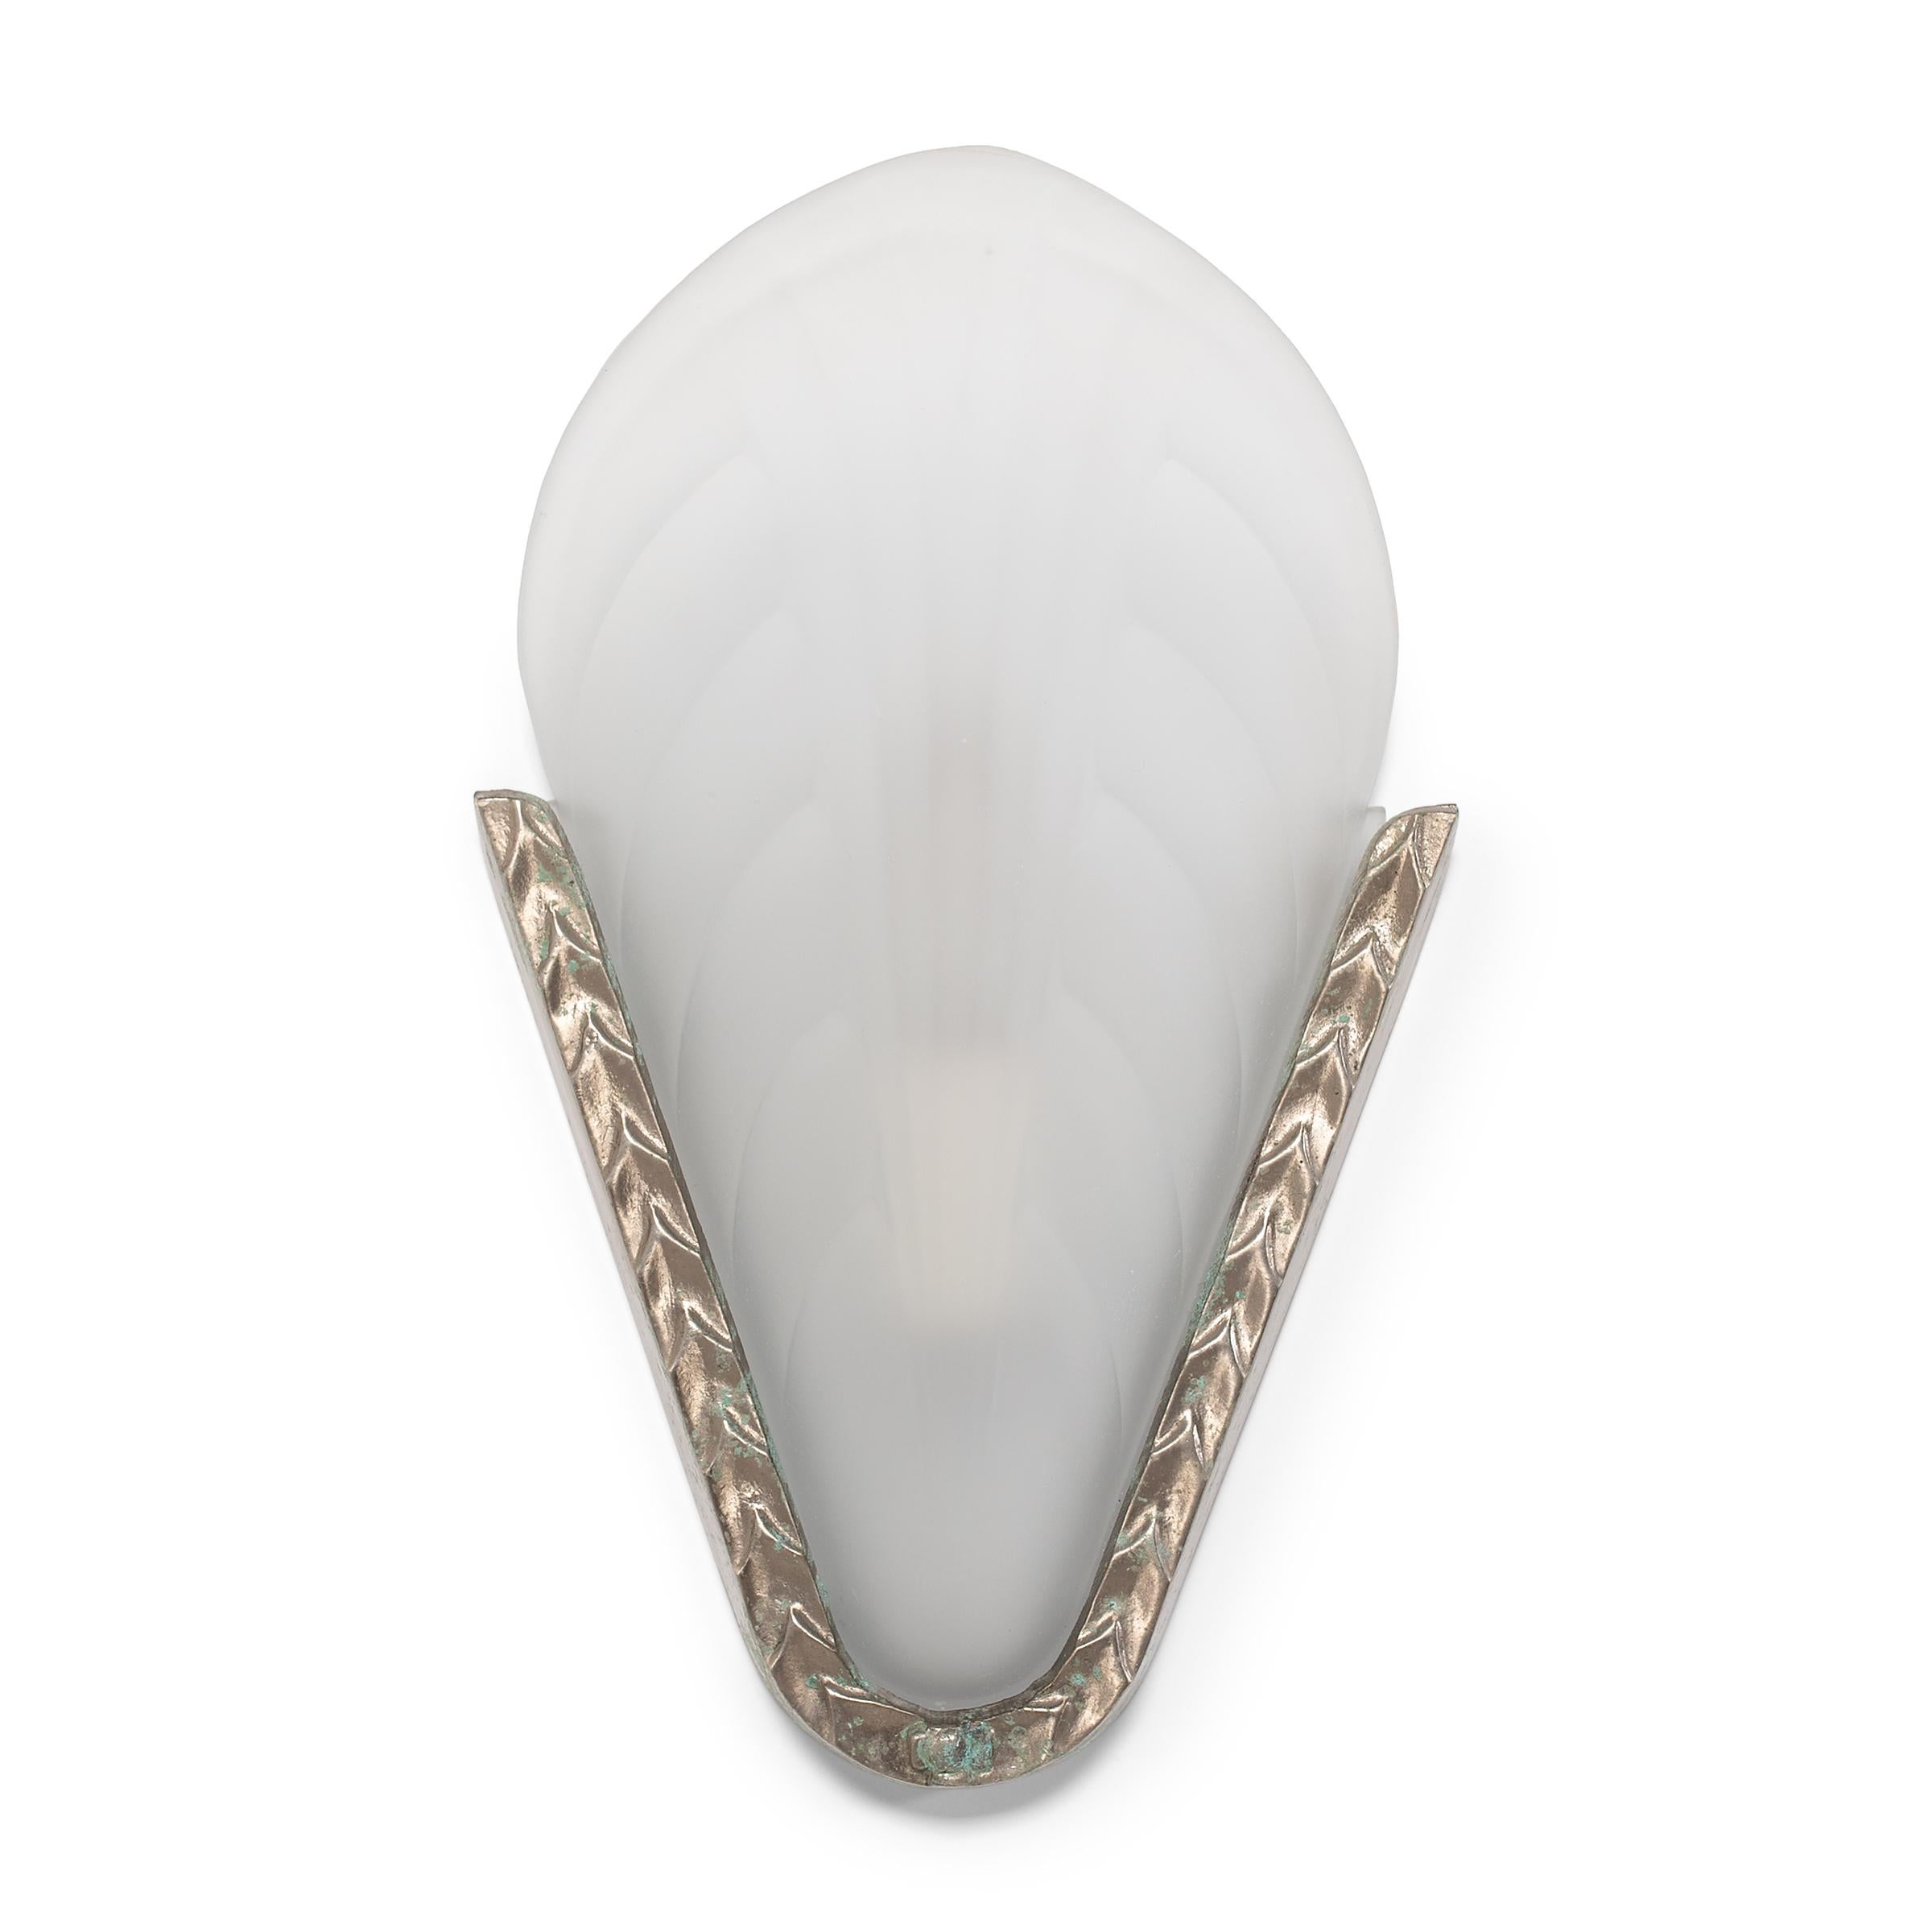 This charming set of early 20th century wall sconces exemplifies French Art Deco lighting with sculptural form and a soft, delicate appearance. The lights have frosted molded-glass shades resembling sea shells or flower petals, patterned with a